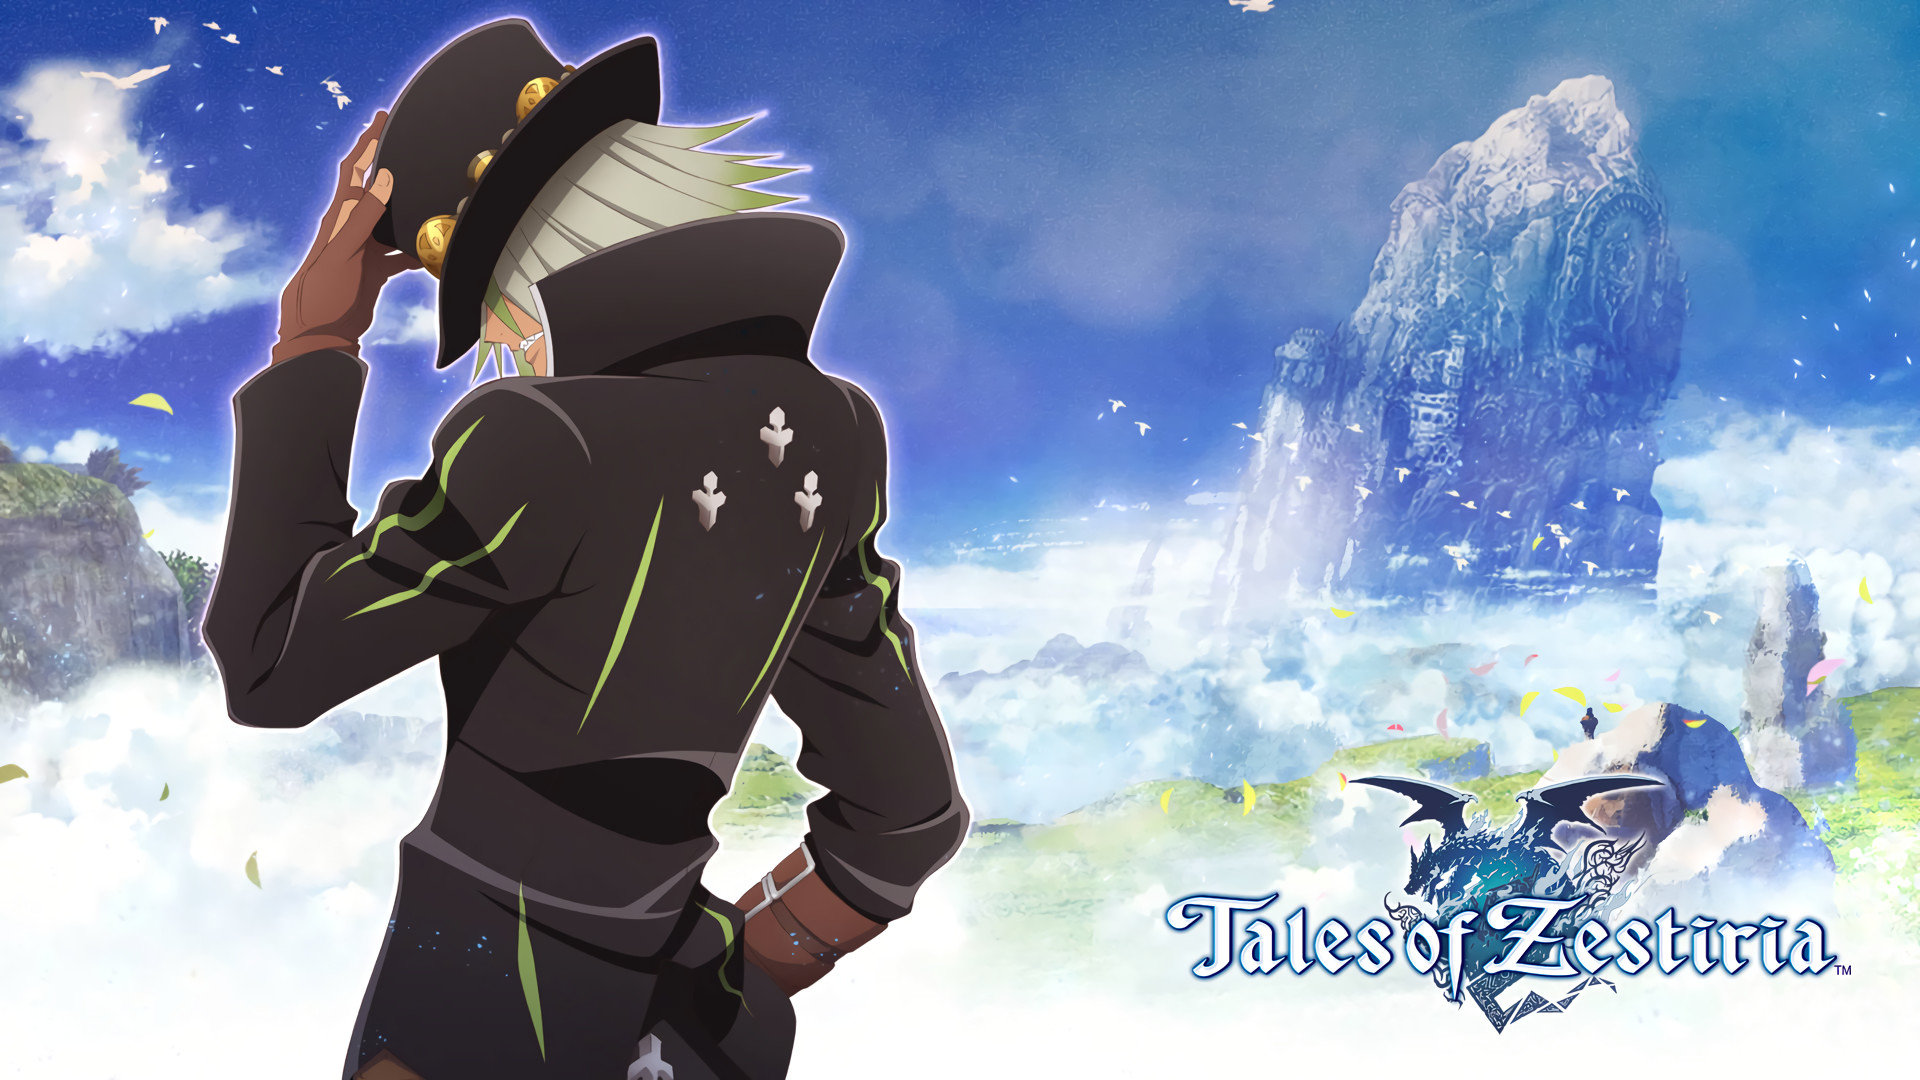 Awesome Tales Of Zestiria free background ID:109576 for hd 1920x1080 computer